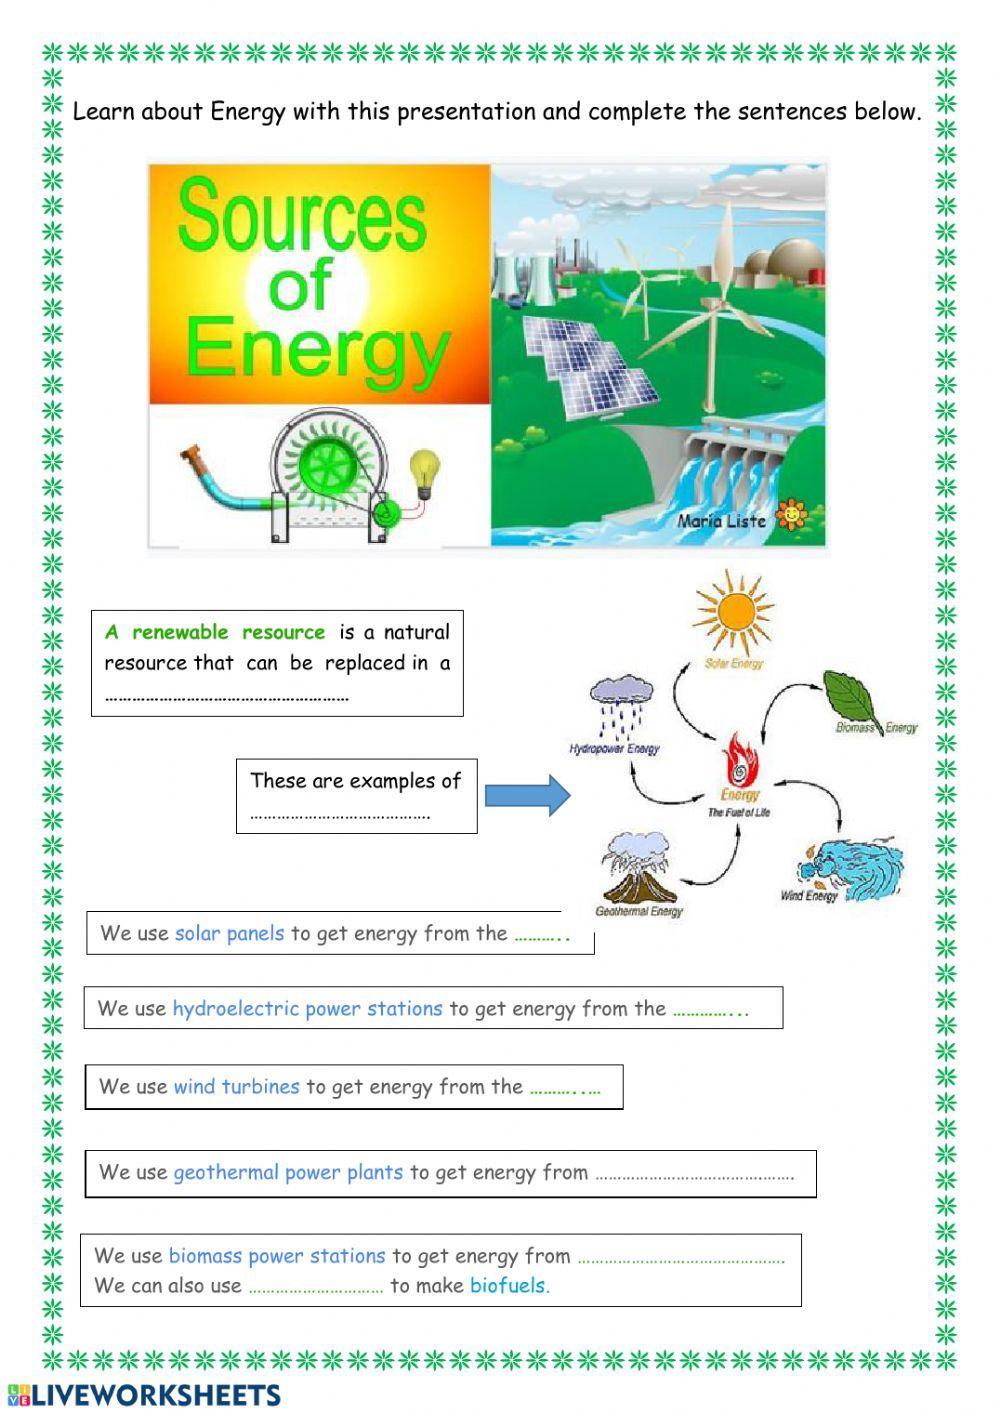 Sources of Energy